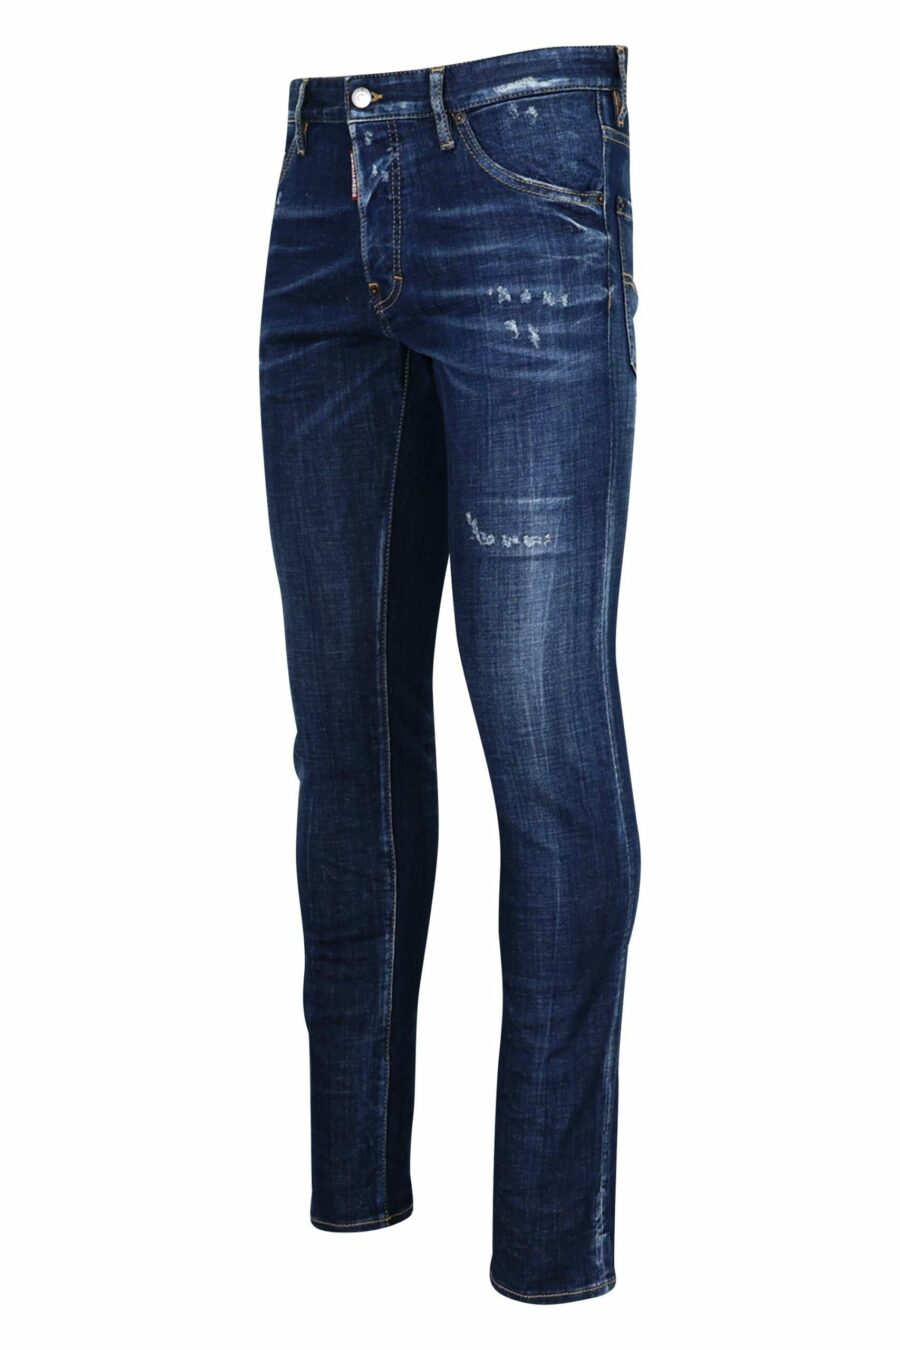 Blue "cool guy" jeans with wear and tear - 8054148102005 1 scaled